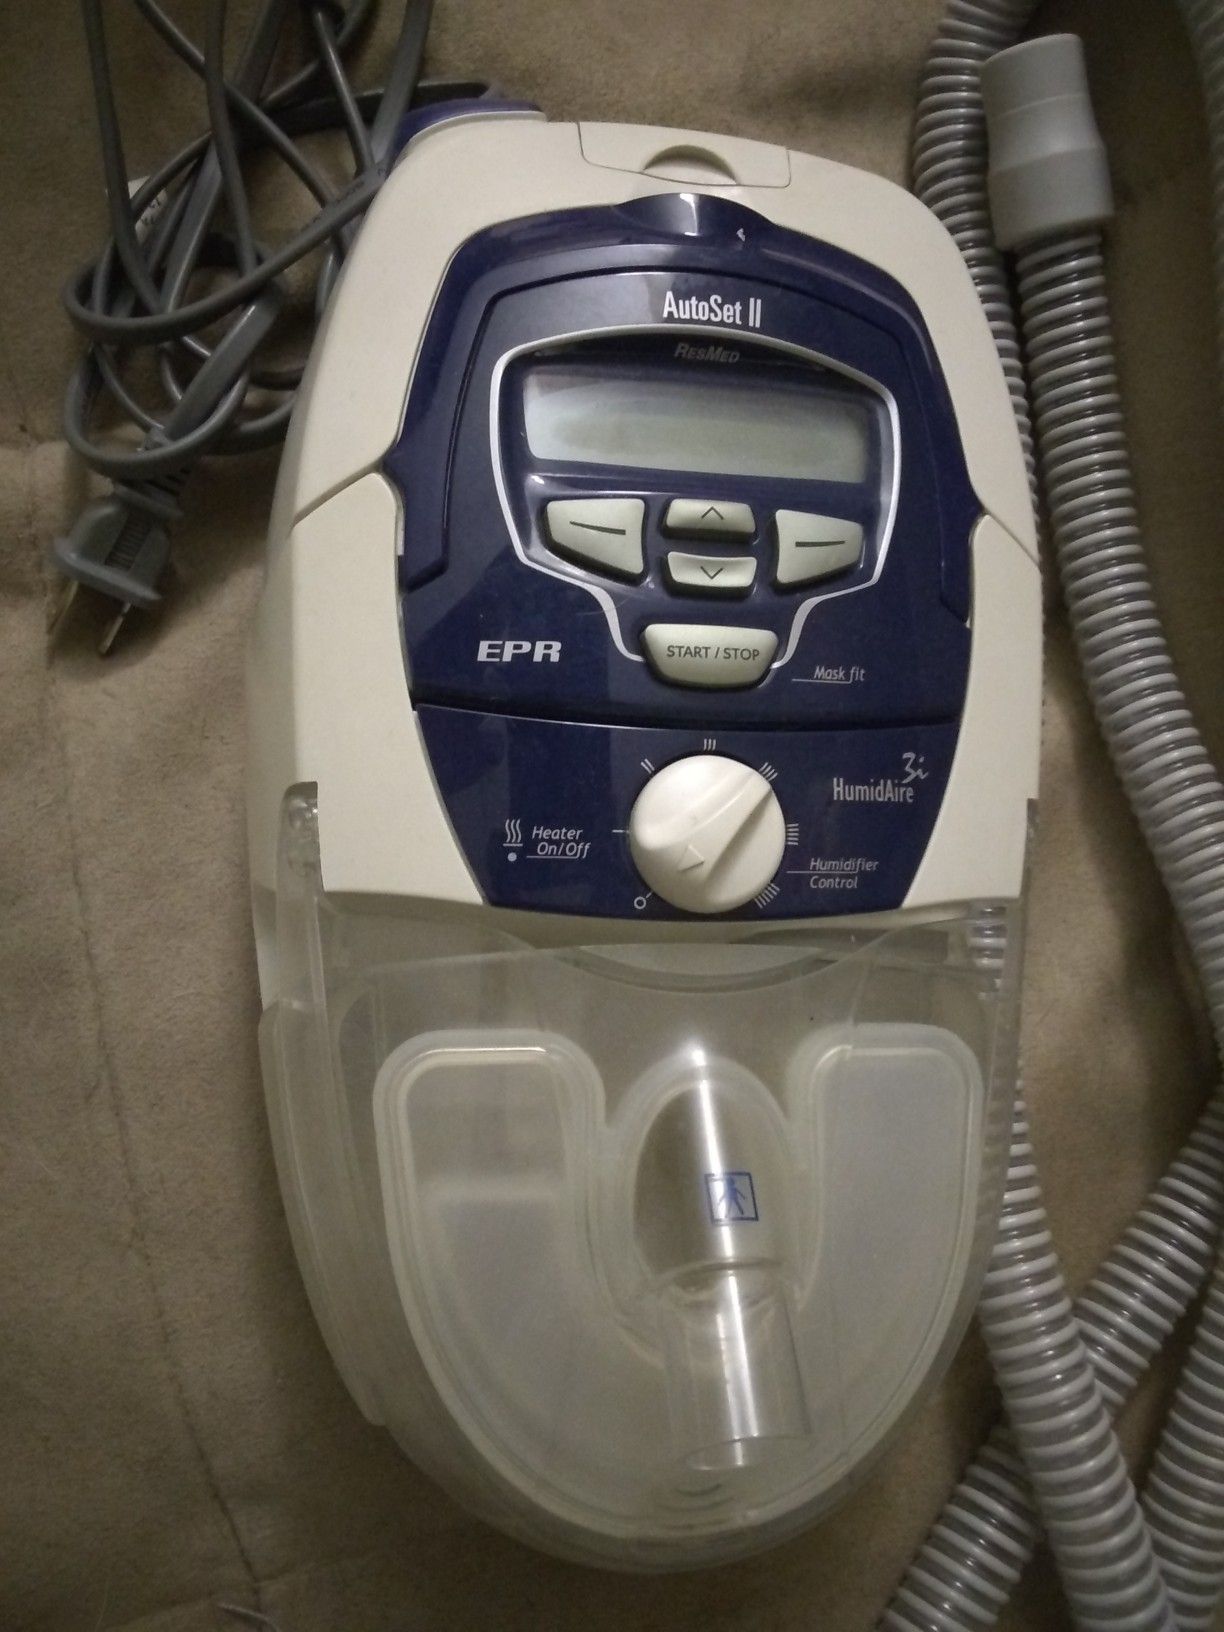 CPAP with humidifier and mask